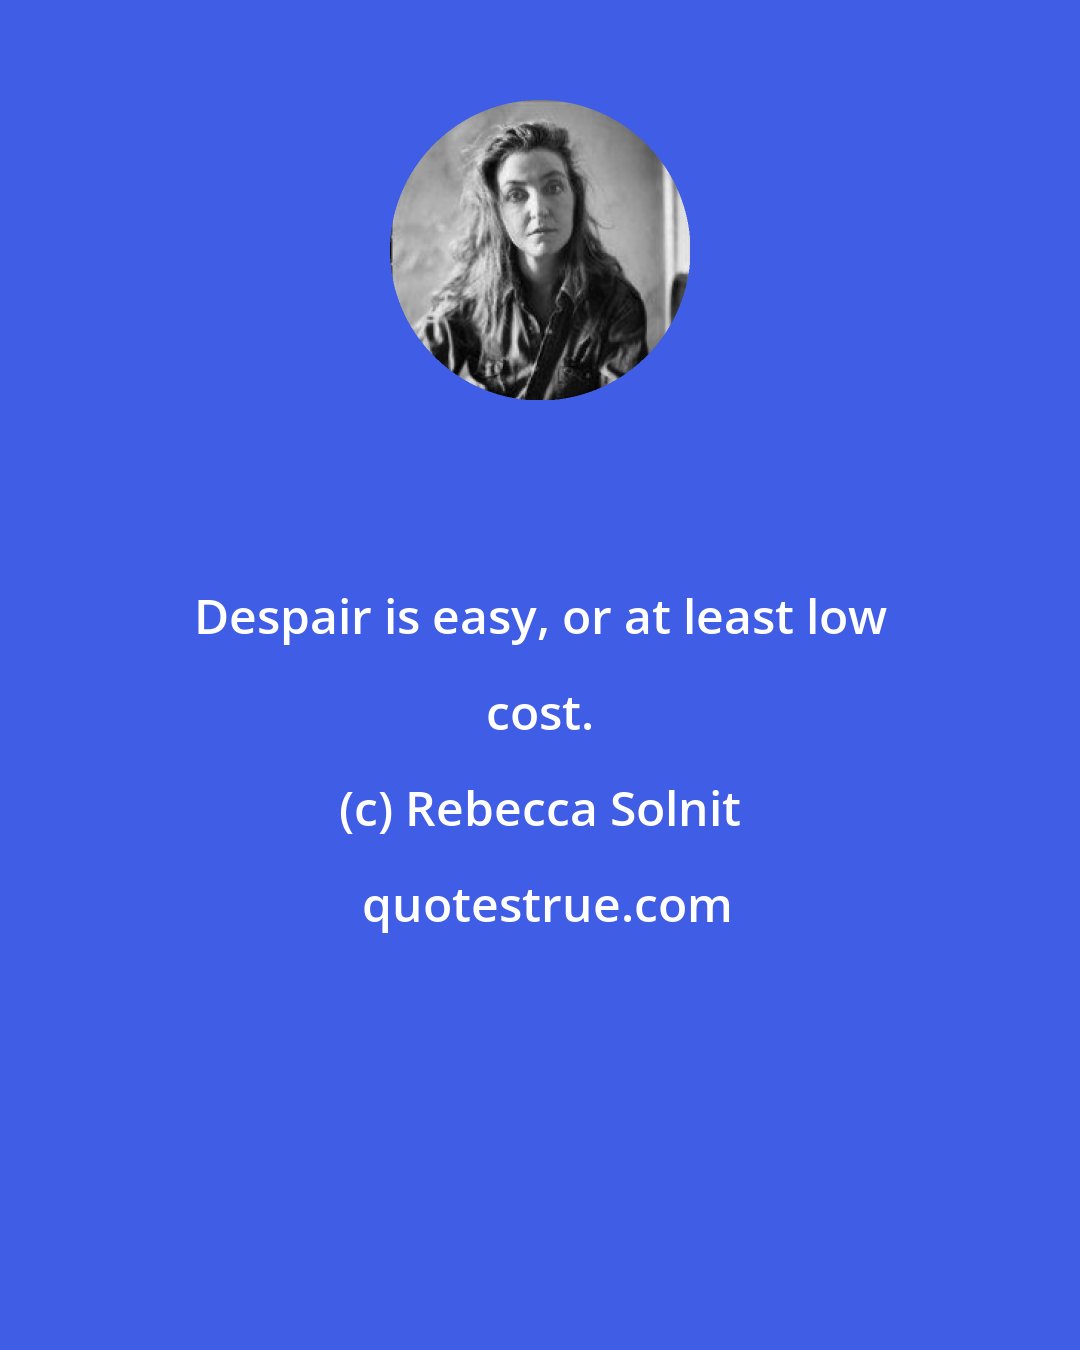 Rebecca Solnit: Despair is easy, or at least low cost.